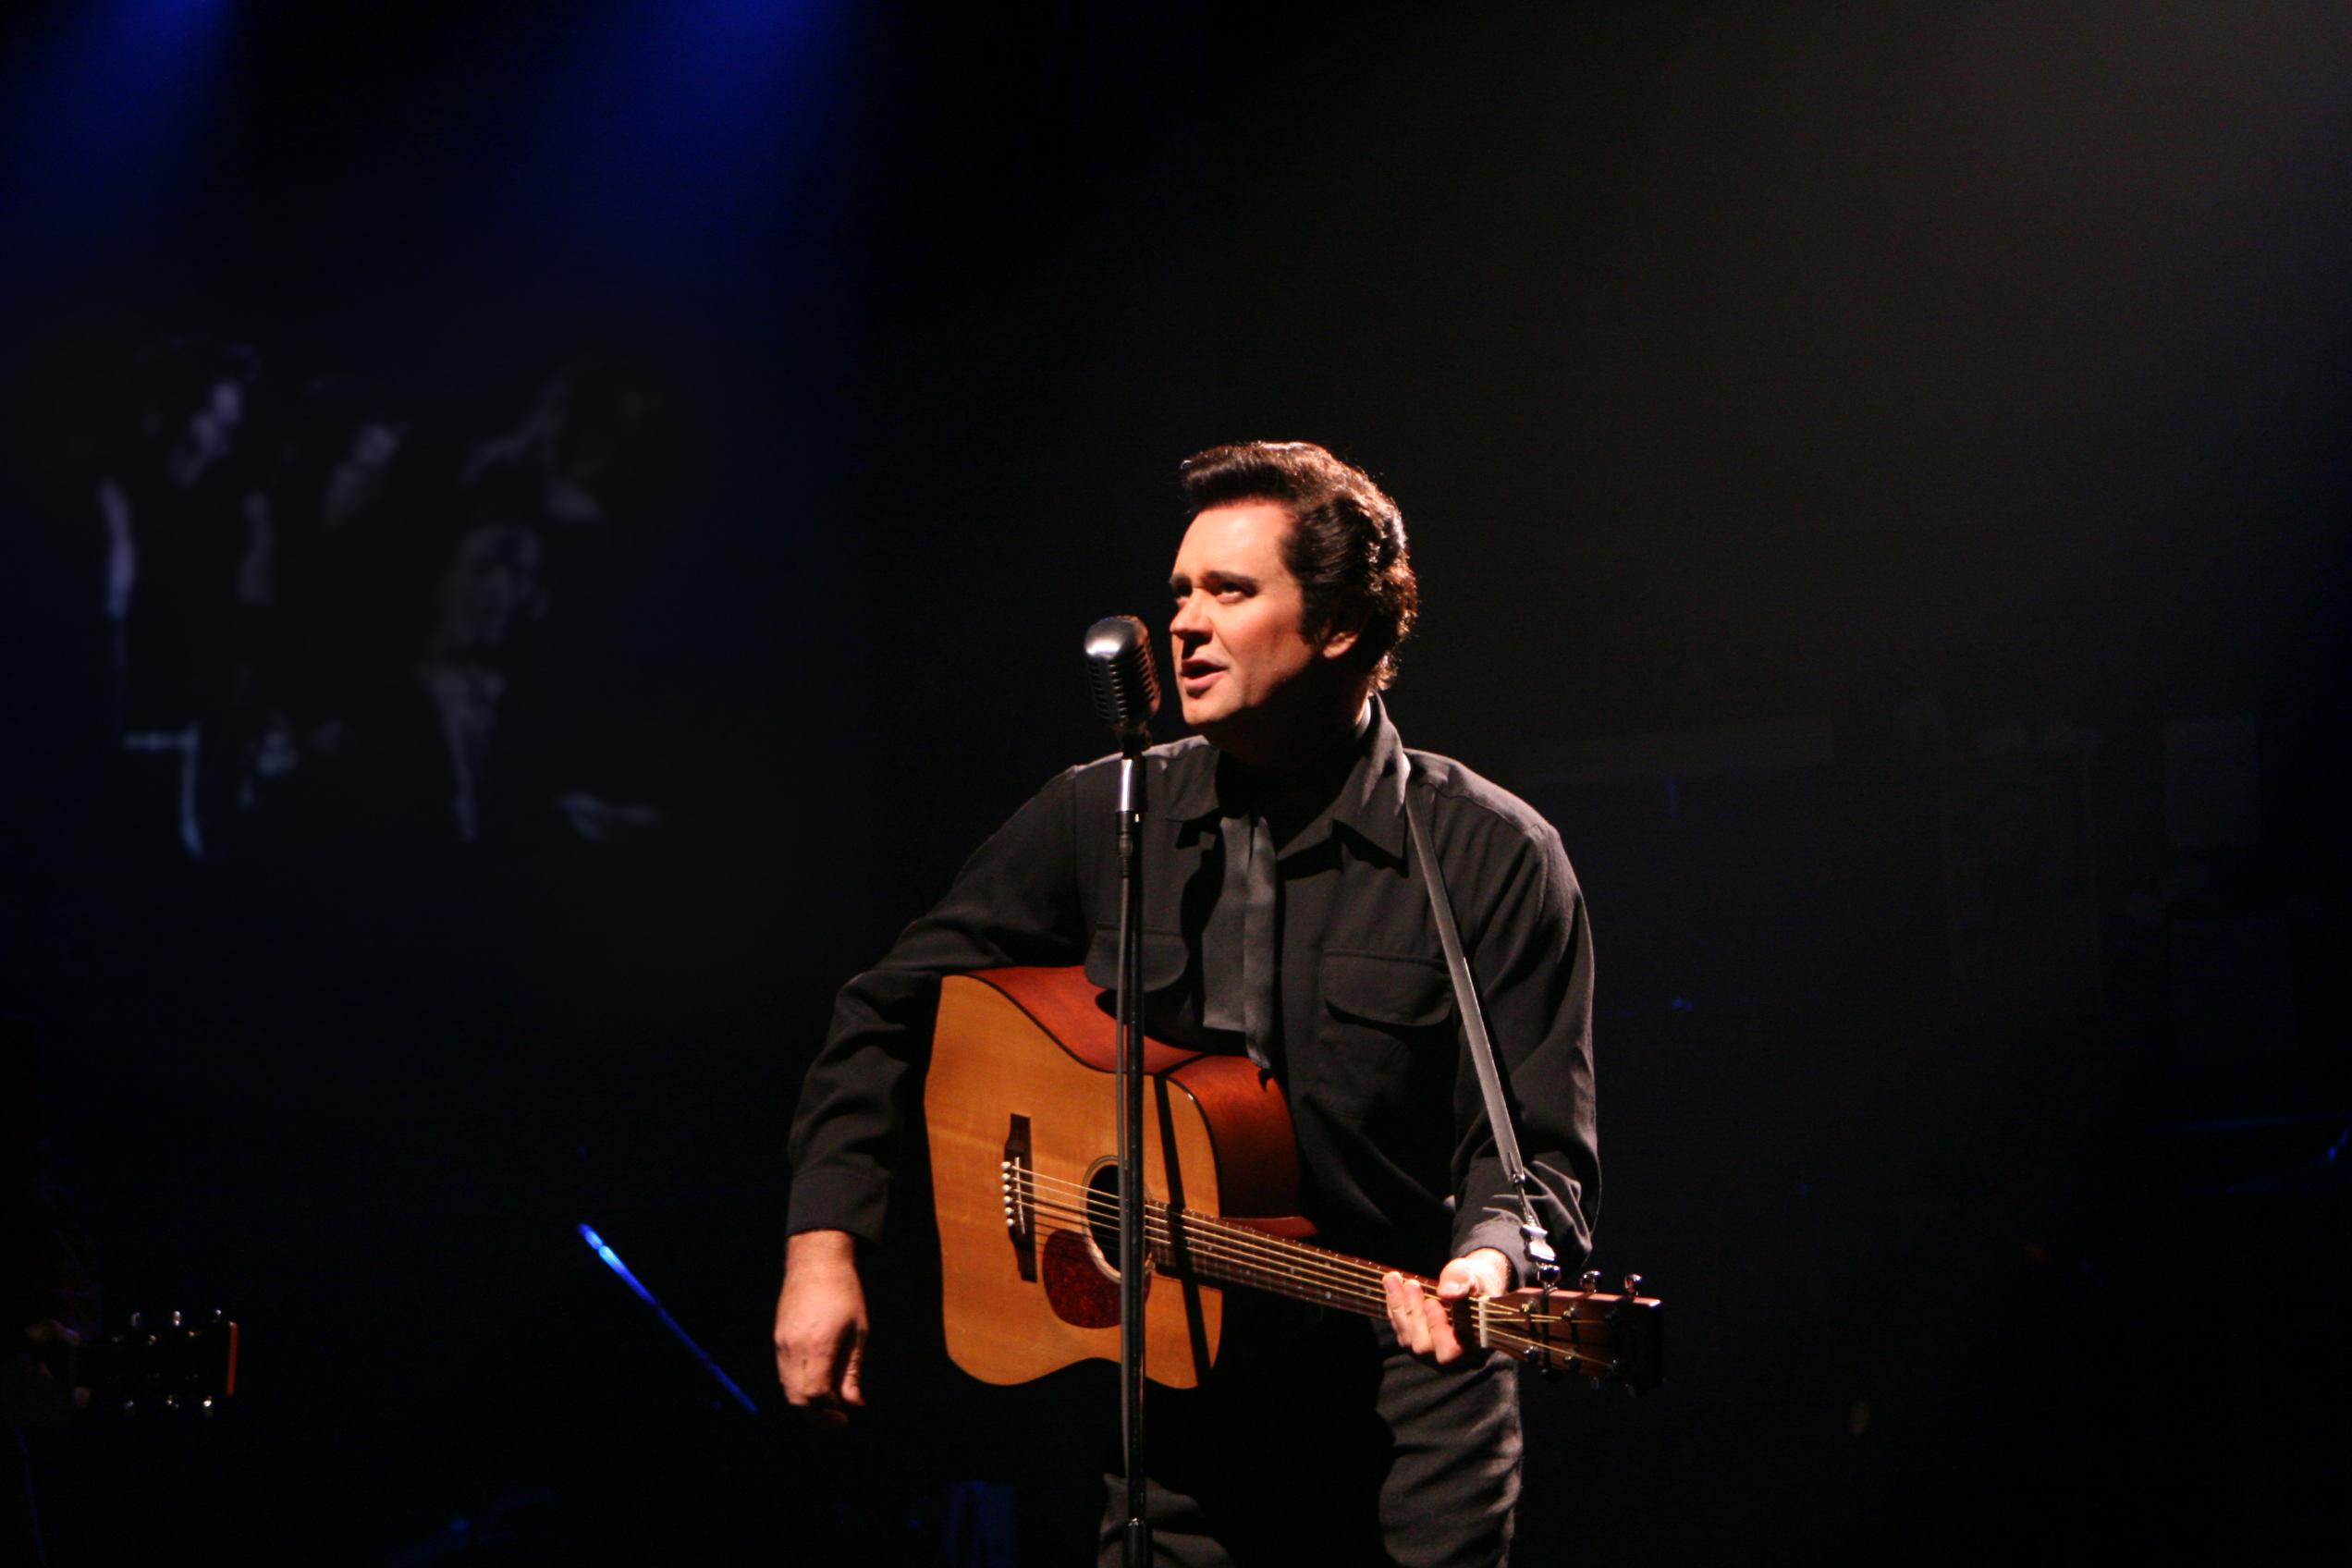 As Johnny Cash in the workshop production of 